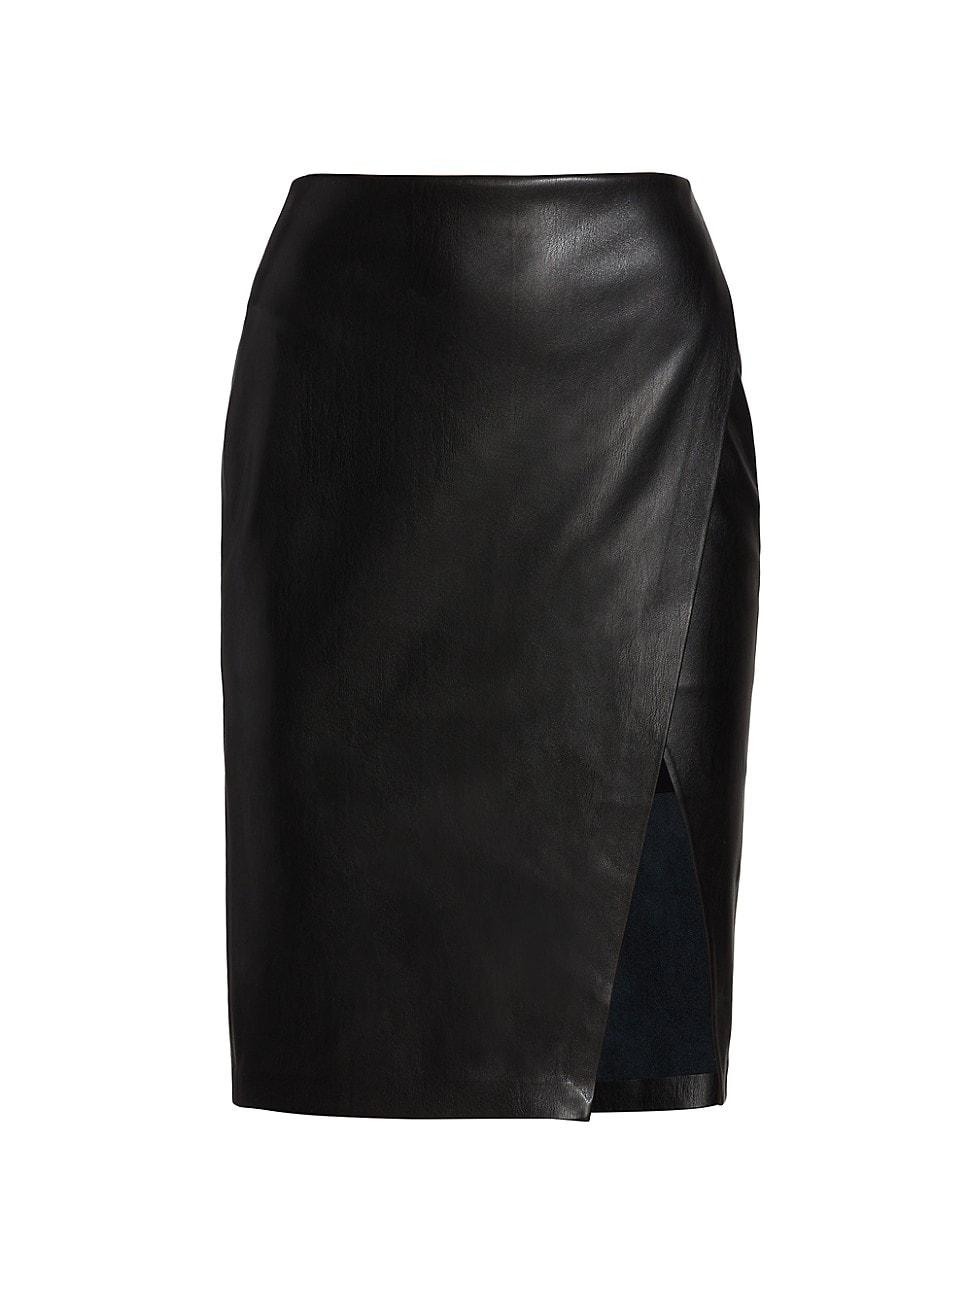 Alice + Olivia Siobhan Faux Leather Midi-skirt in Black | Lyst